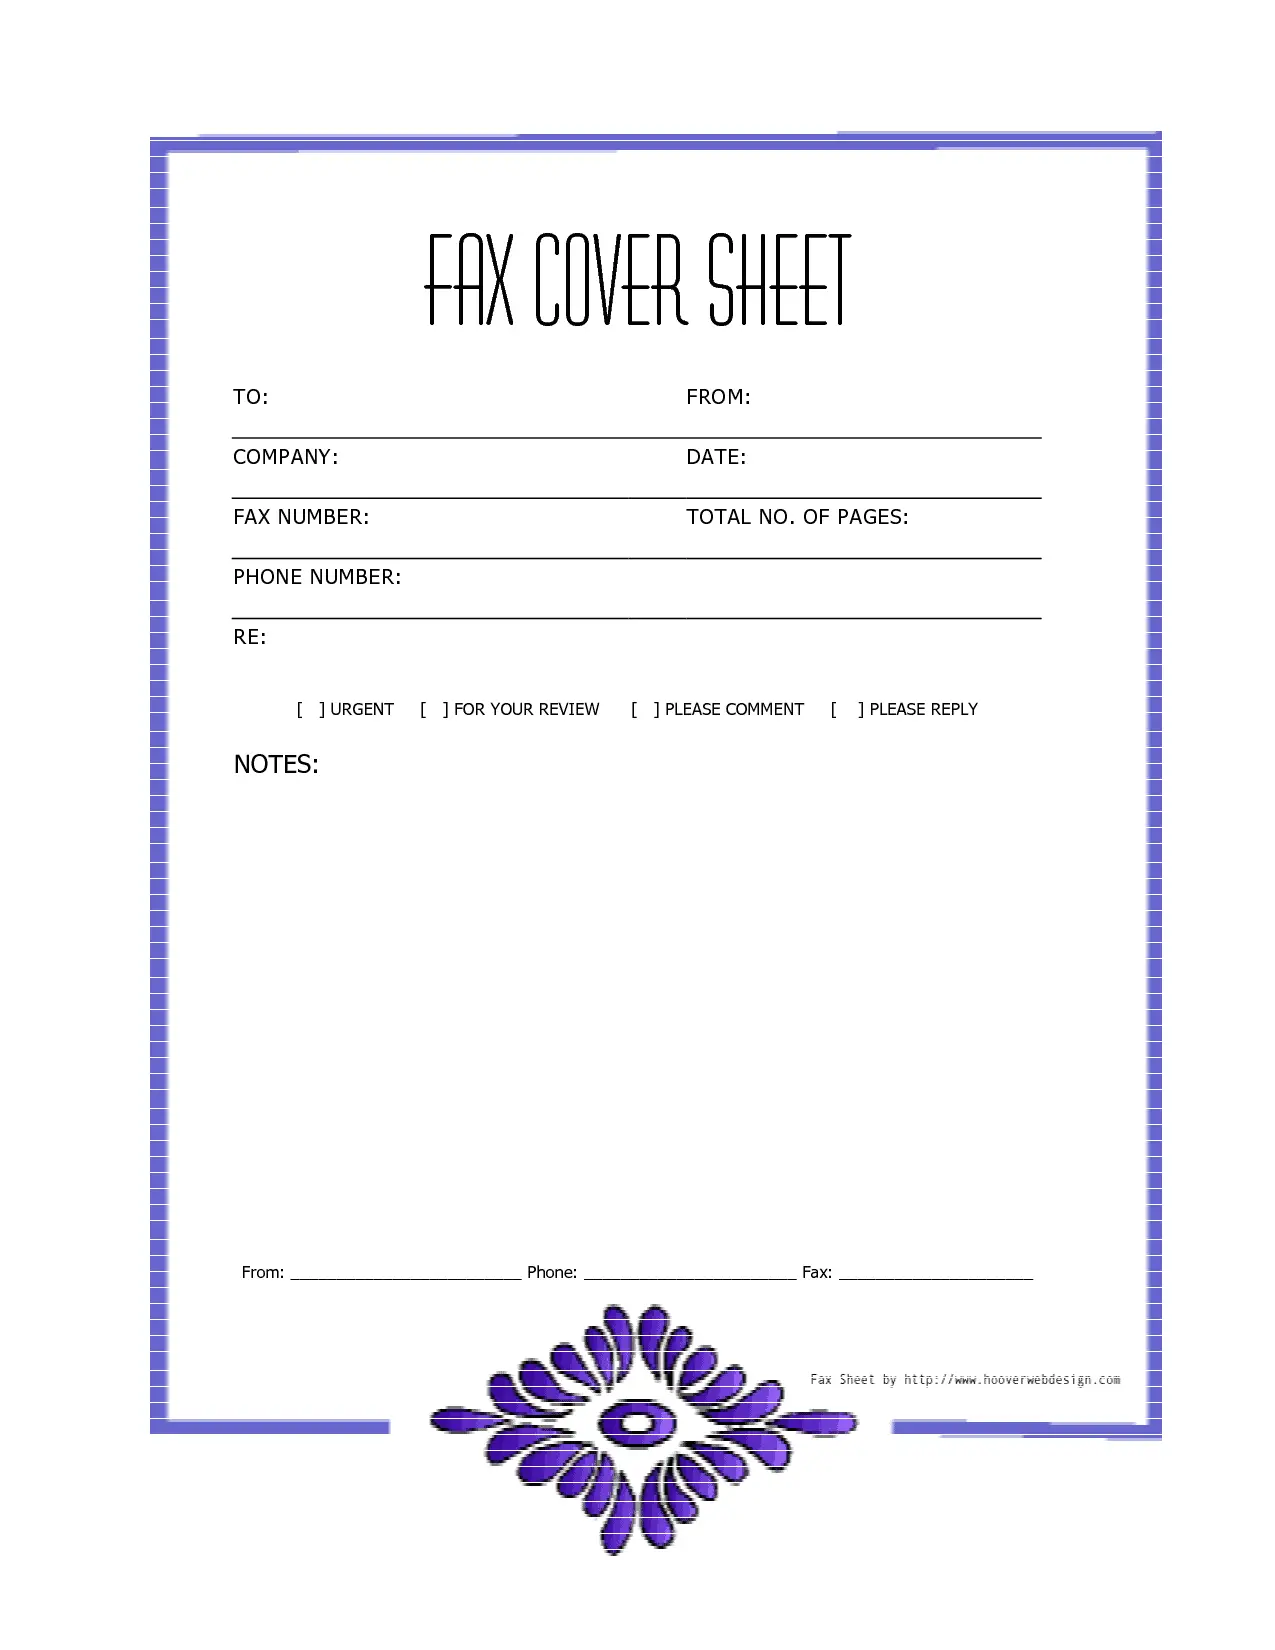 17 Fax Cover Sheet Templates Free Pdf Word Printables